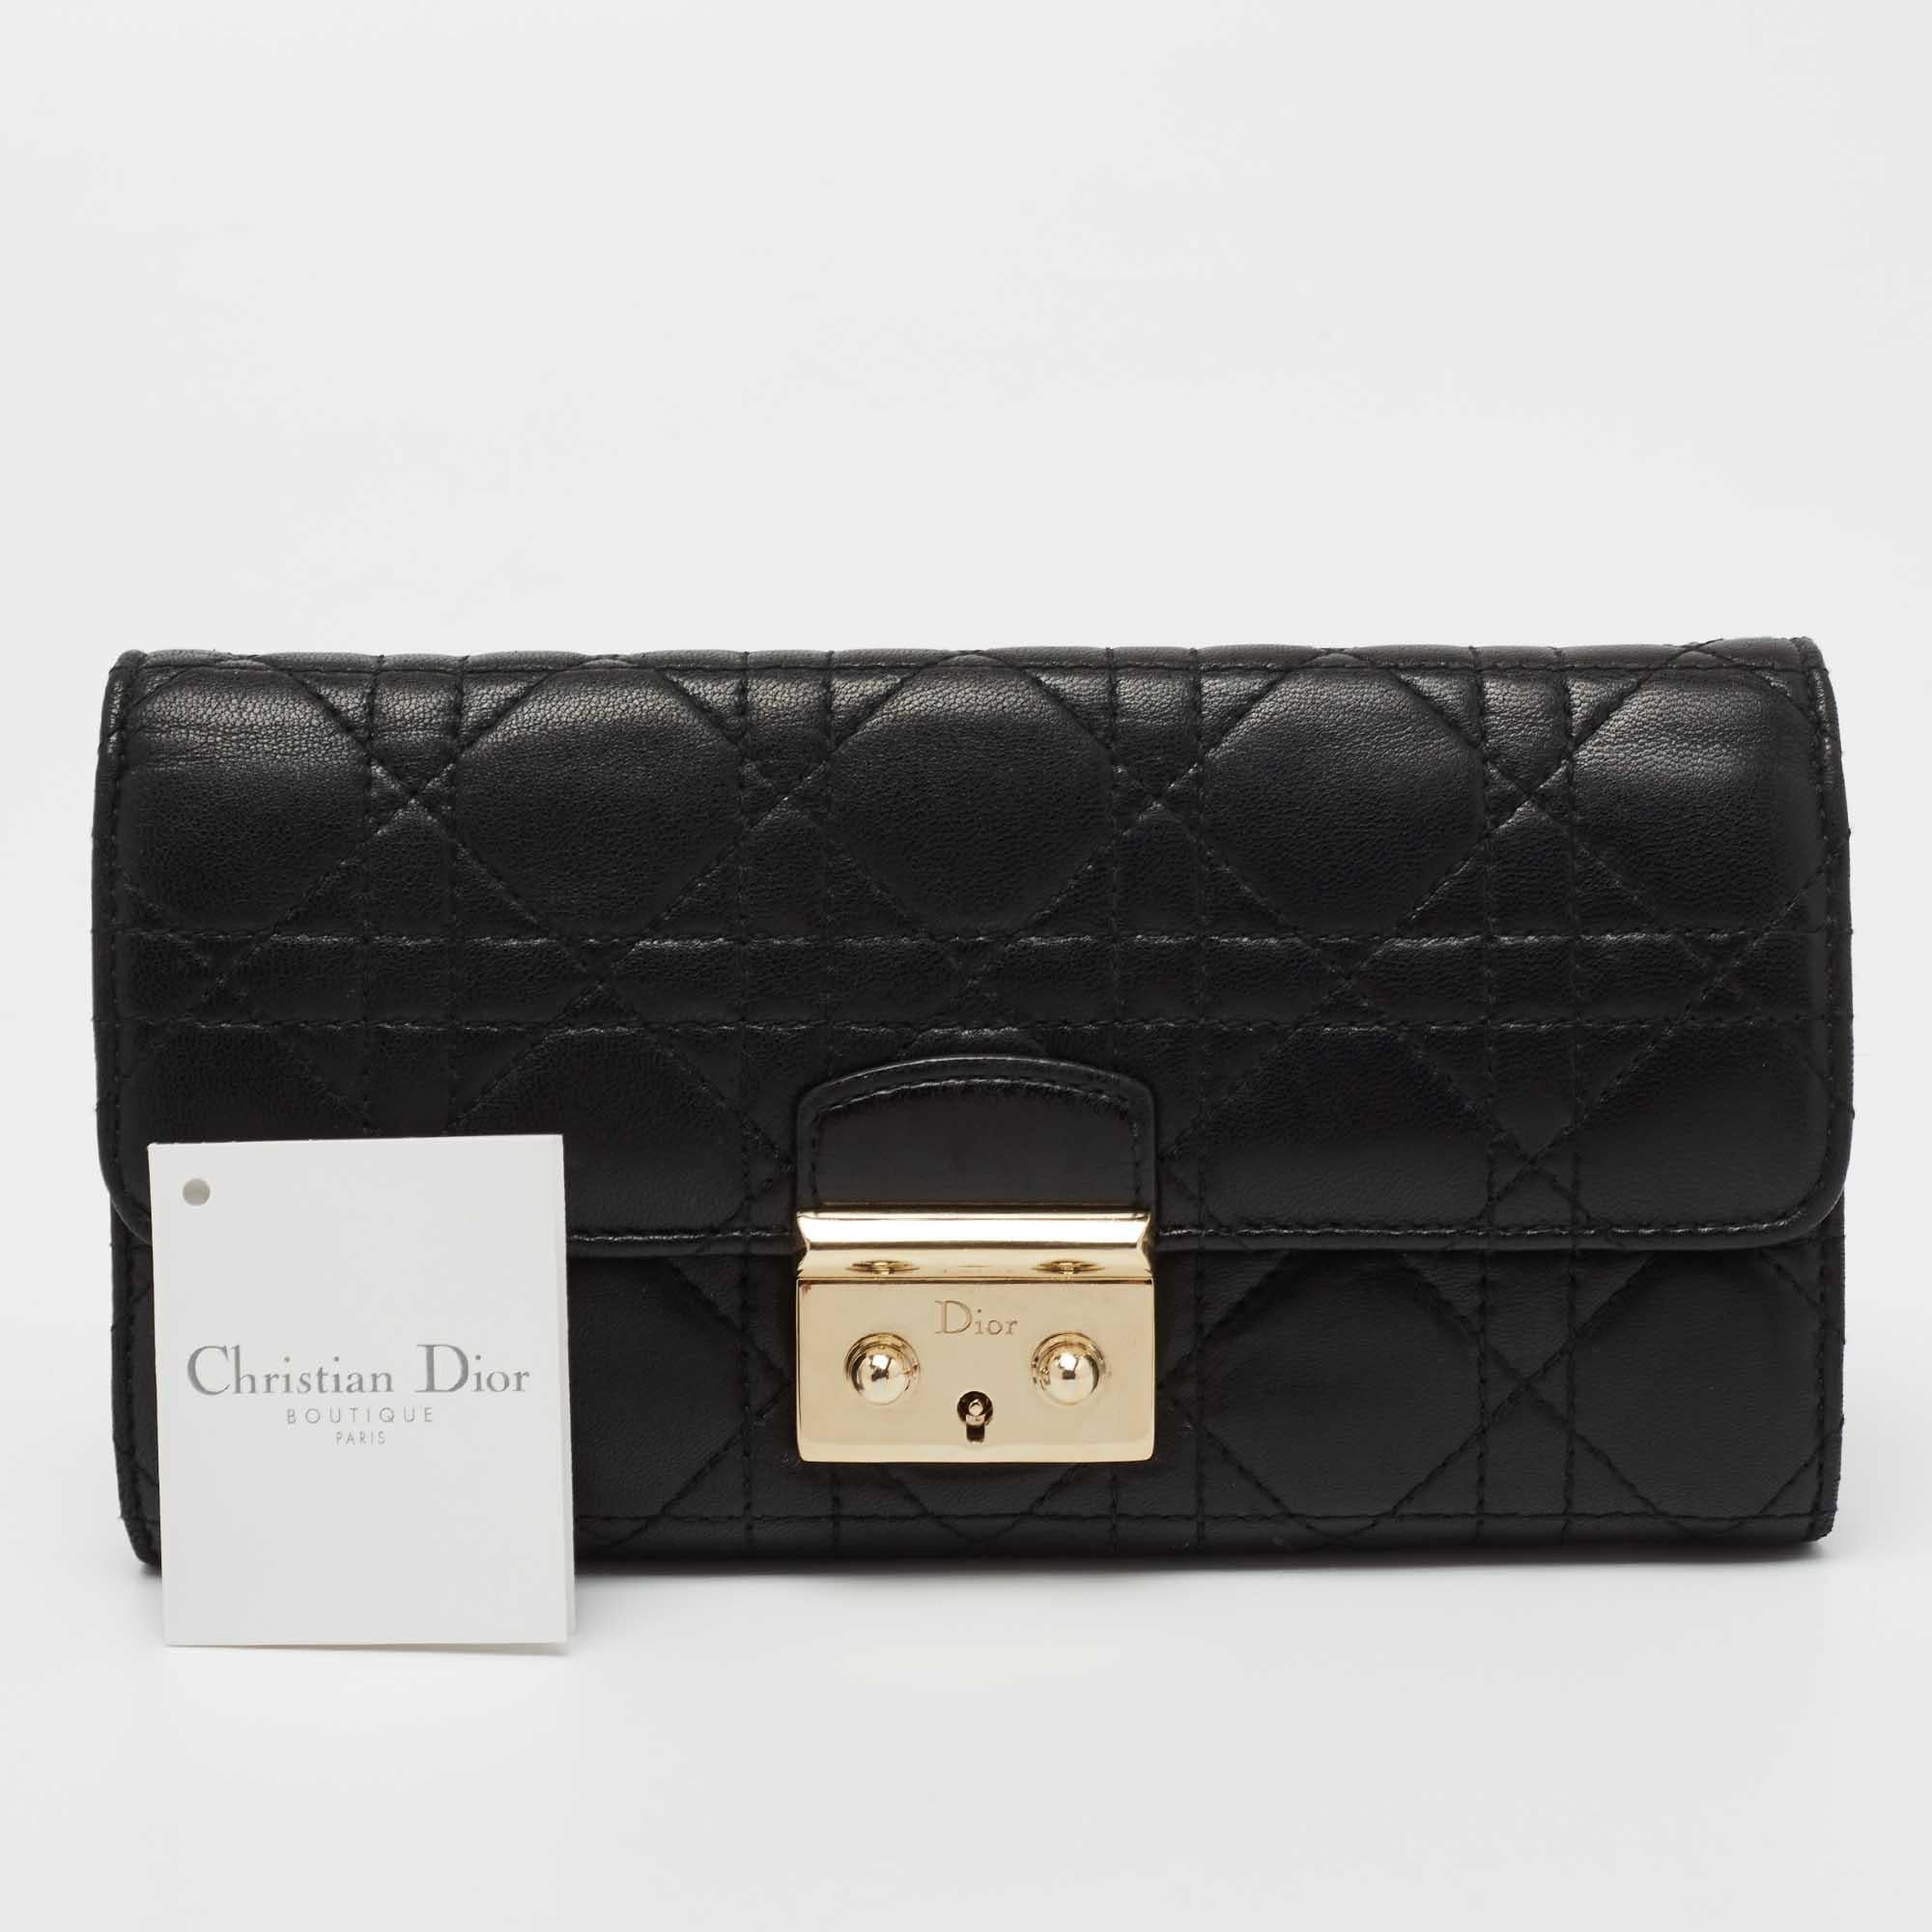 Dior Black Cannage Leather Miss Dior Continental Wallet 11